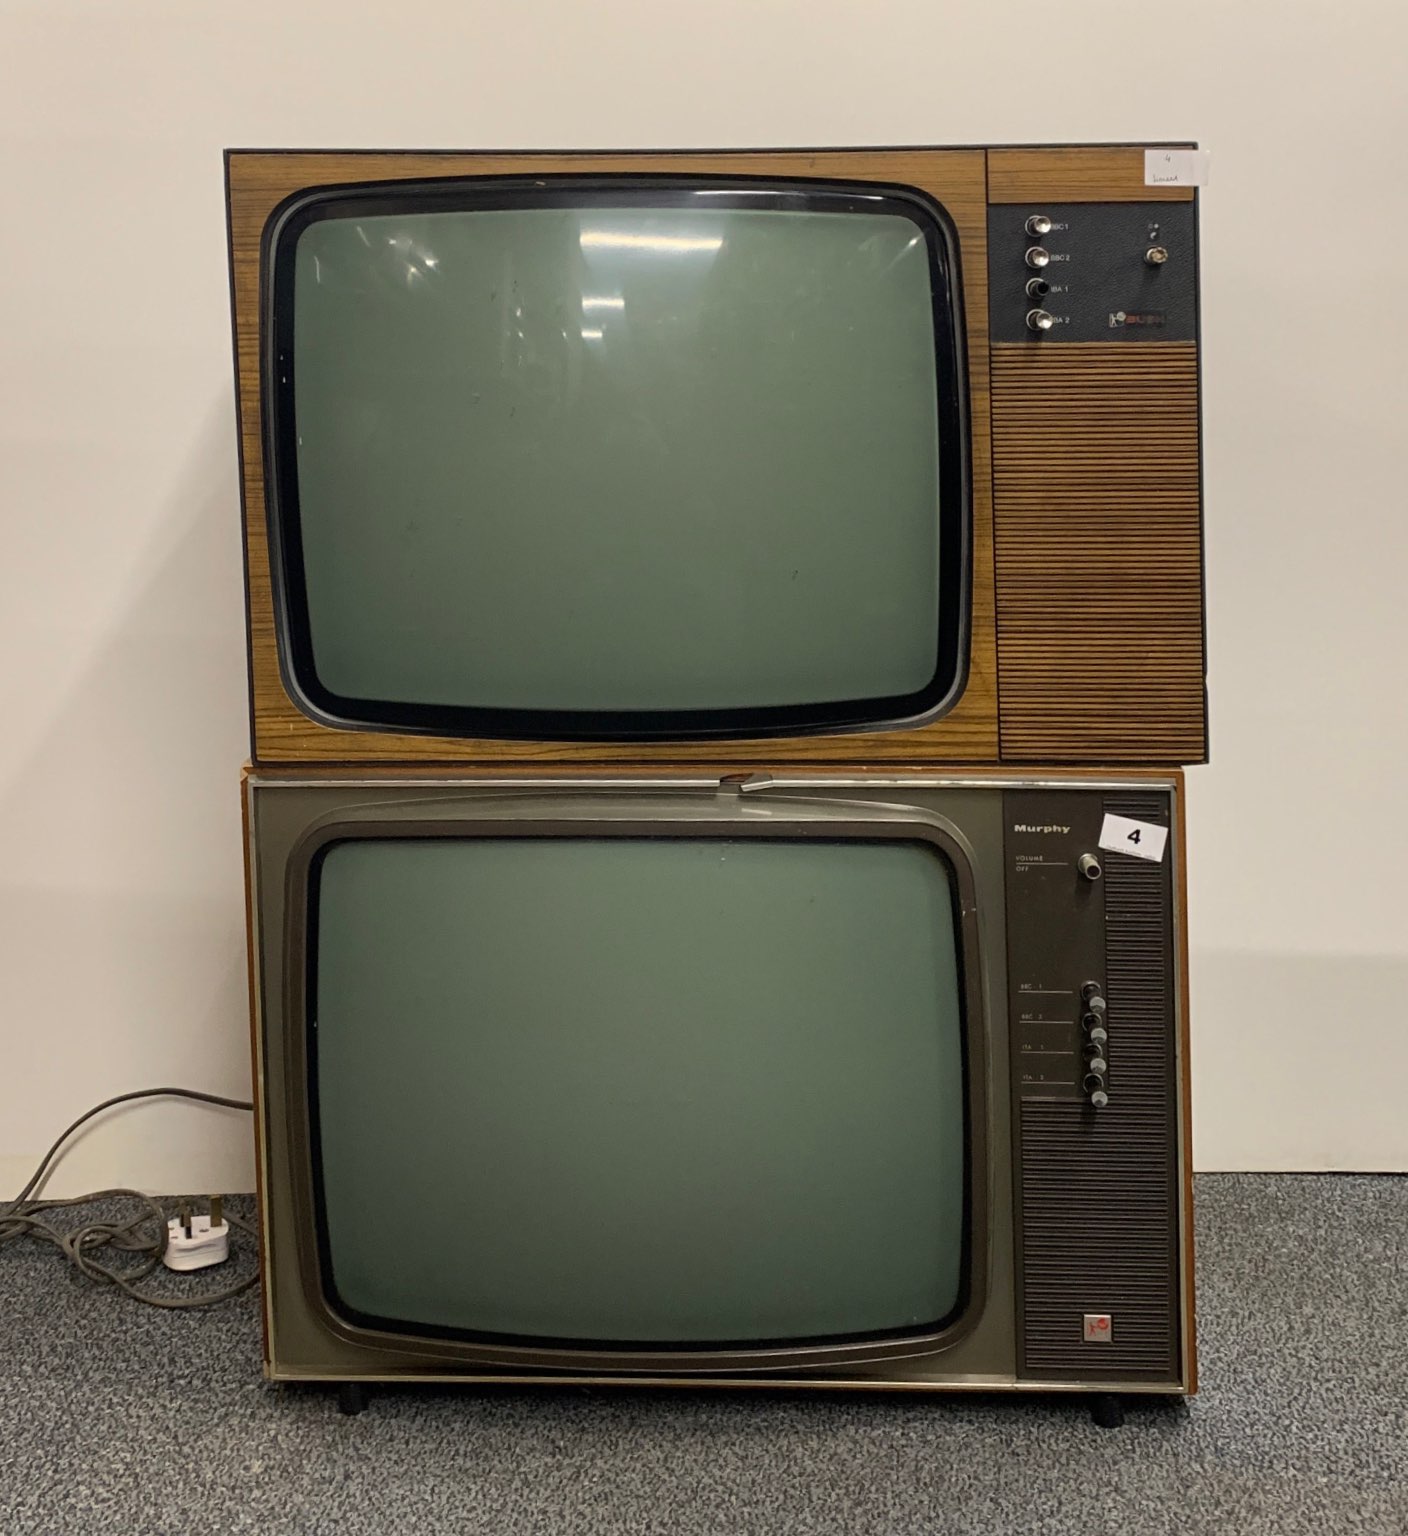 A wooden cased Murphey television receiver type V2023 together with a wooden cased Bush television